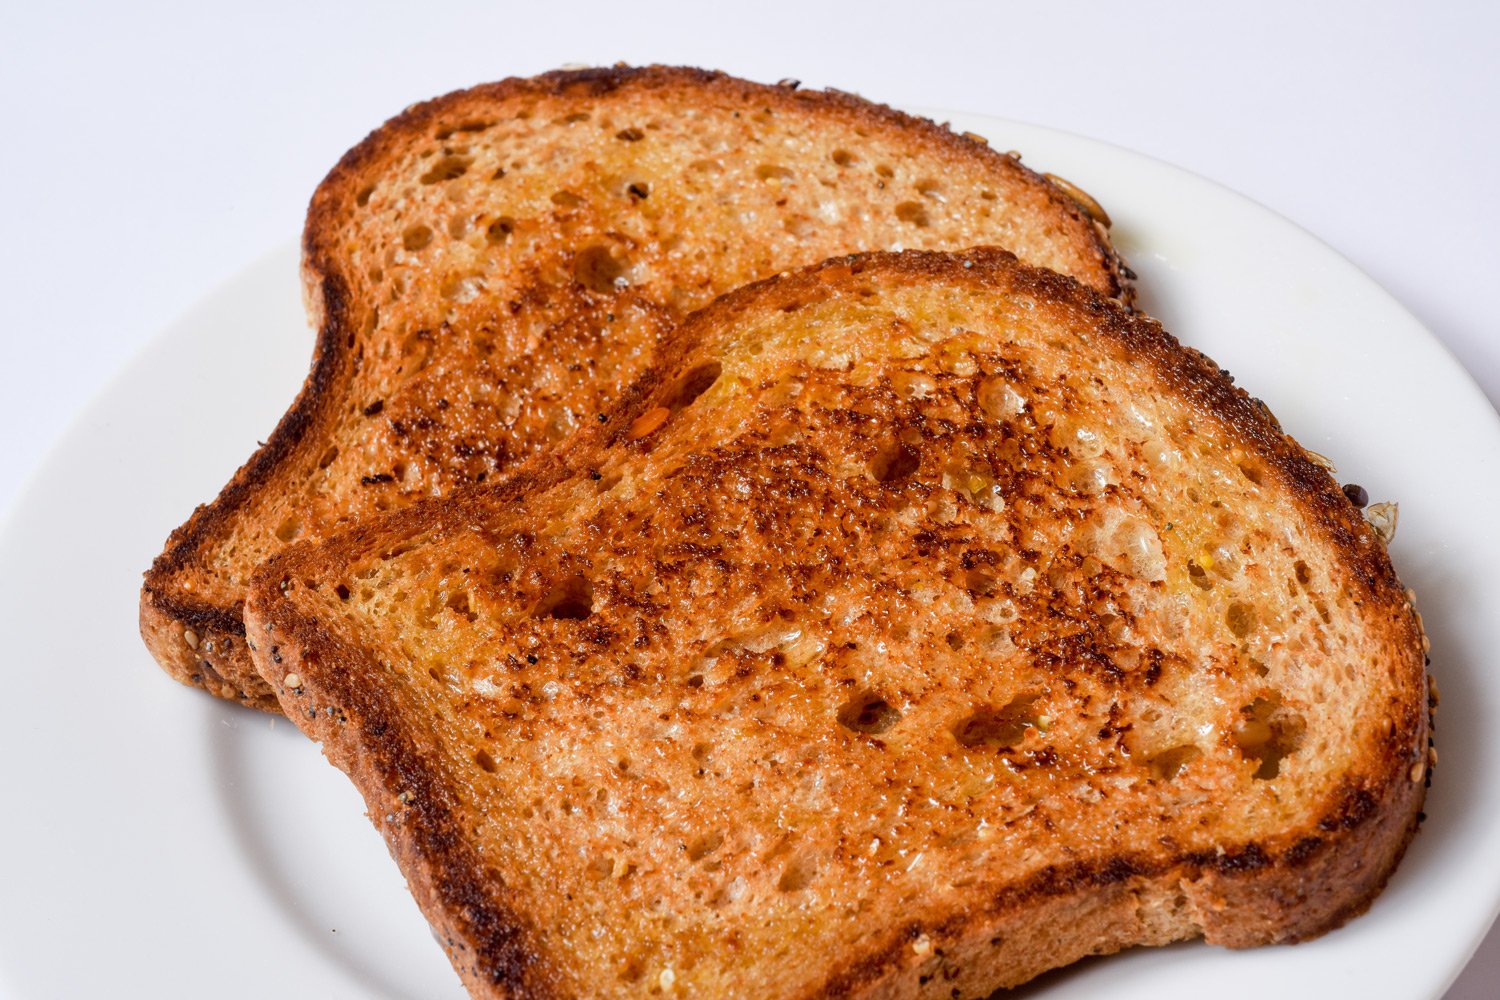 toast for mac 9.0.4